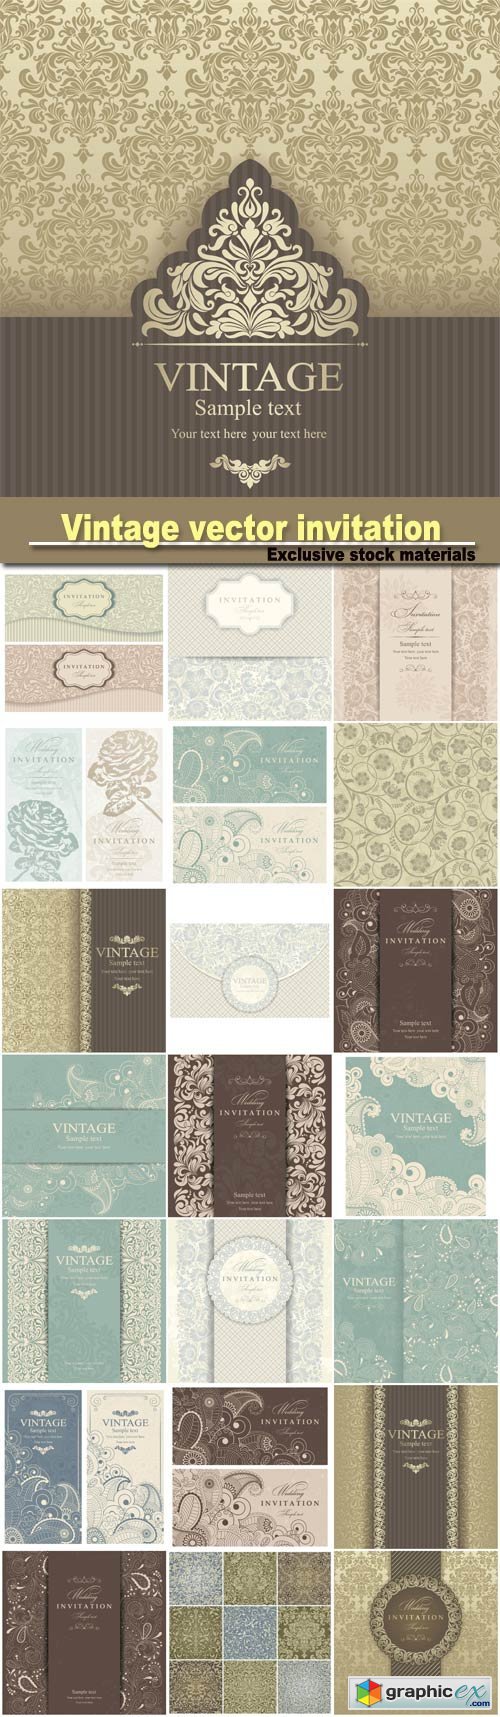 Vintage vector invitation with patterns